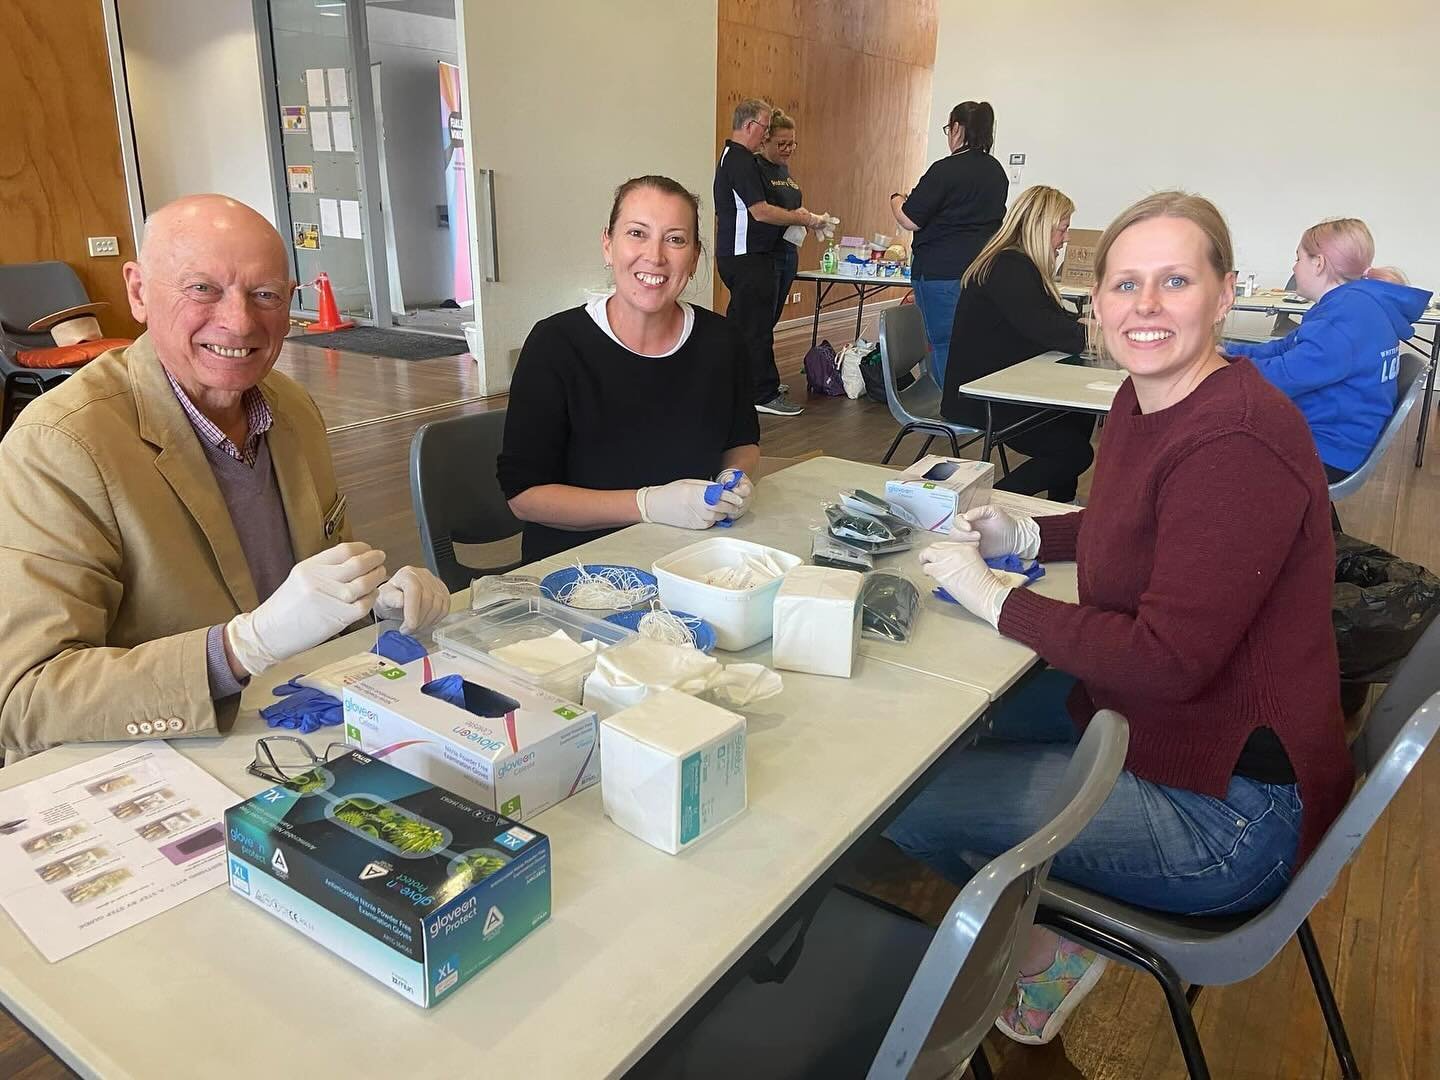 Delighted to help assemble birthing kits last Saturday at a volunteers&rsquo; gathering organised by the Rotary Club of Canberra Sundowners. These kits will ensure women in needy areas around the world give birth in an improved hygienic manner. Pleas